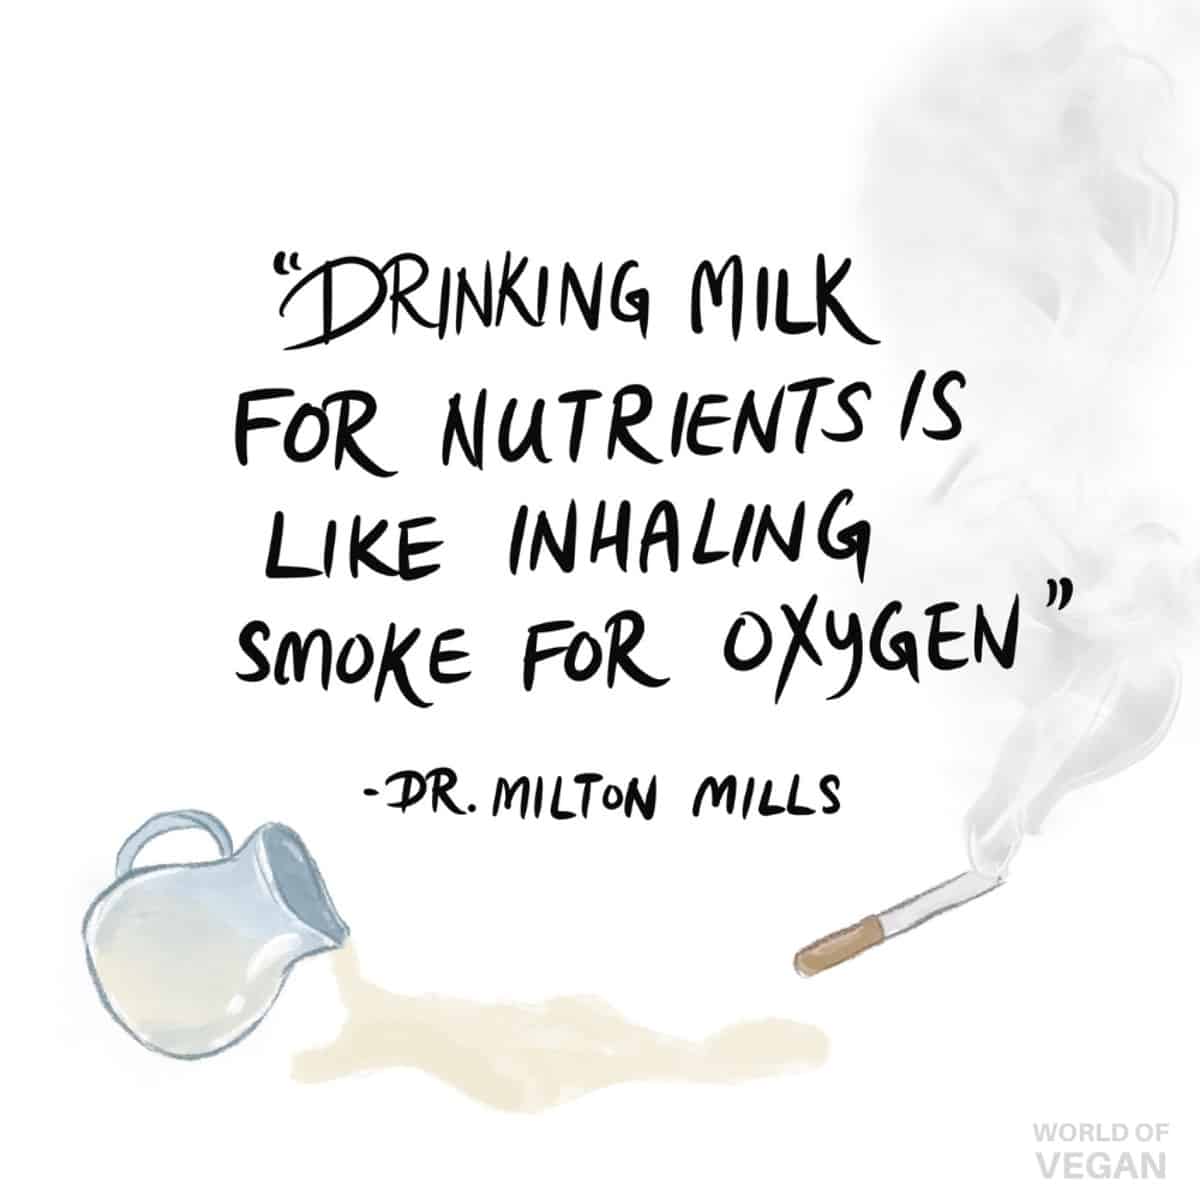 Vegan artwork graphic with quote from Dr. Milton Mills that says "Drinking milk for nutrients is like inhaling smoke for oxygen."